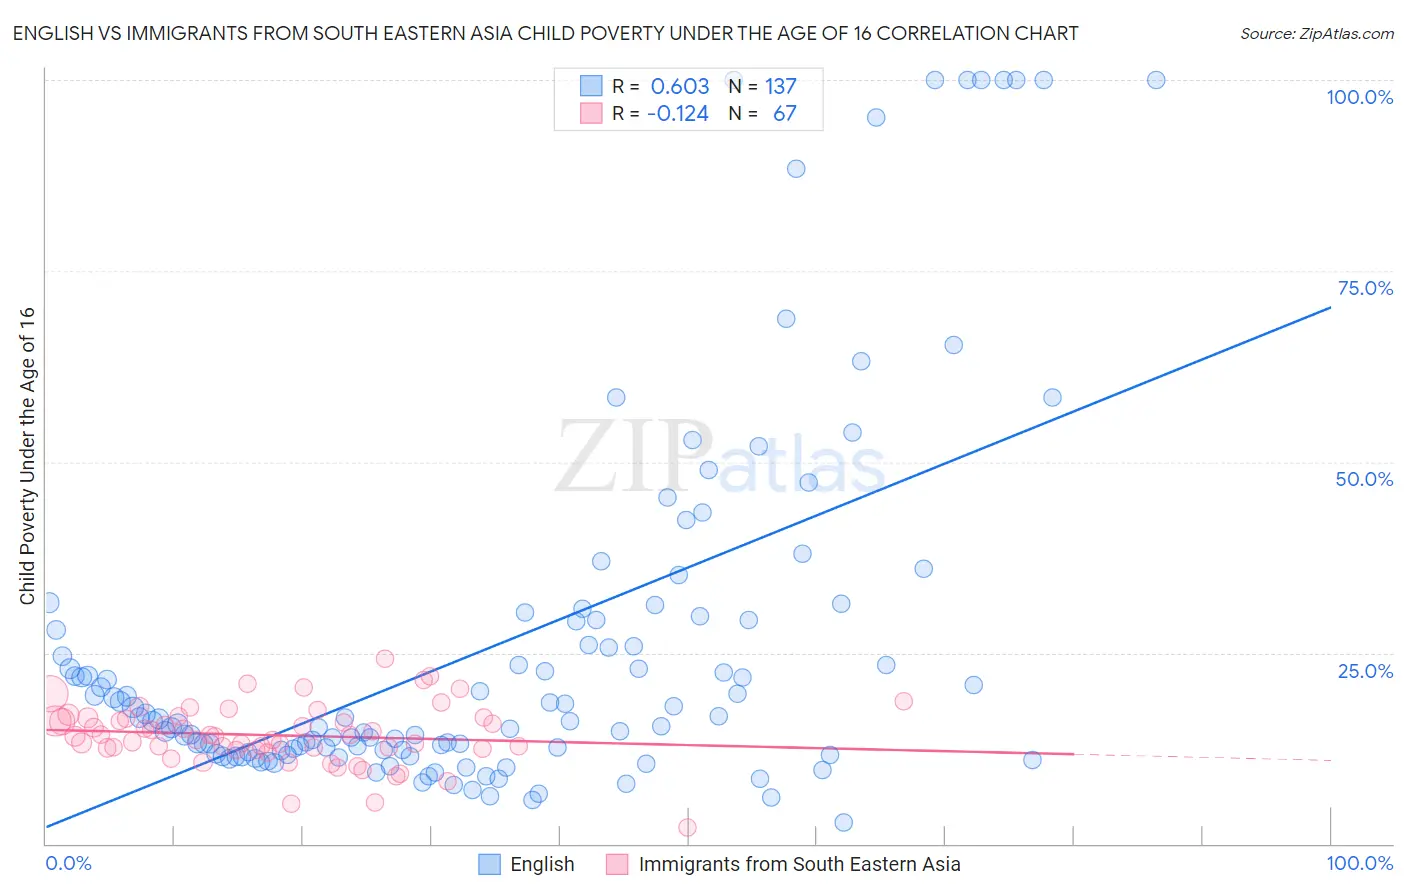 English vs Immigrants from South Eastern Asia Child Poverty Under the Age of 16